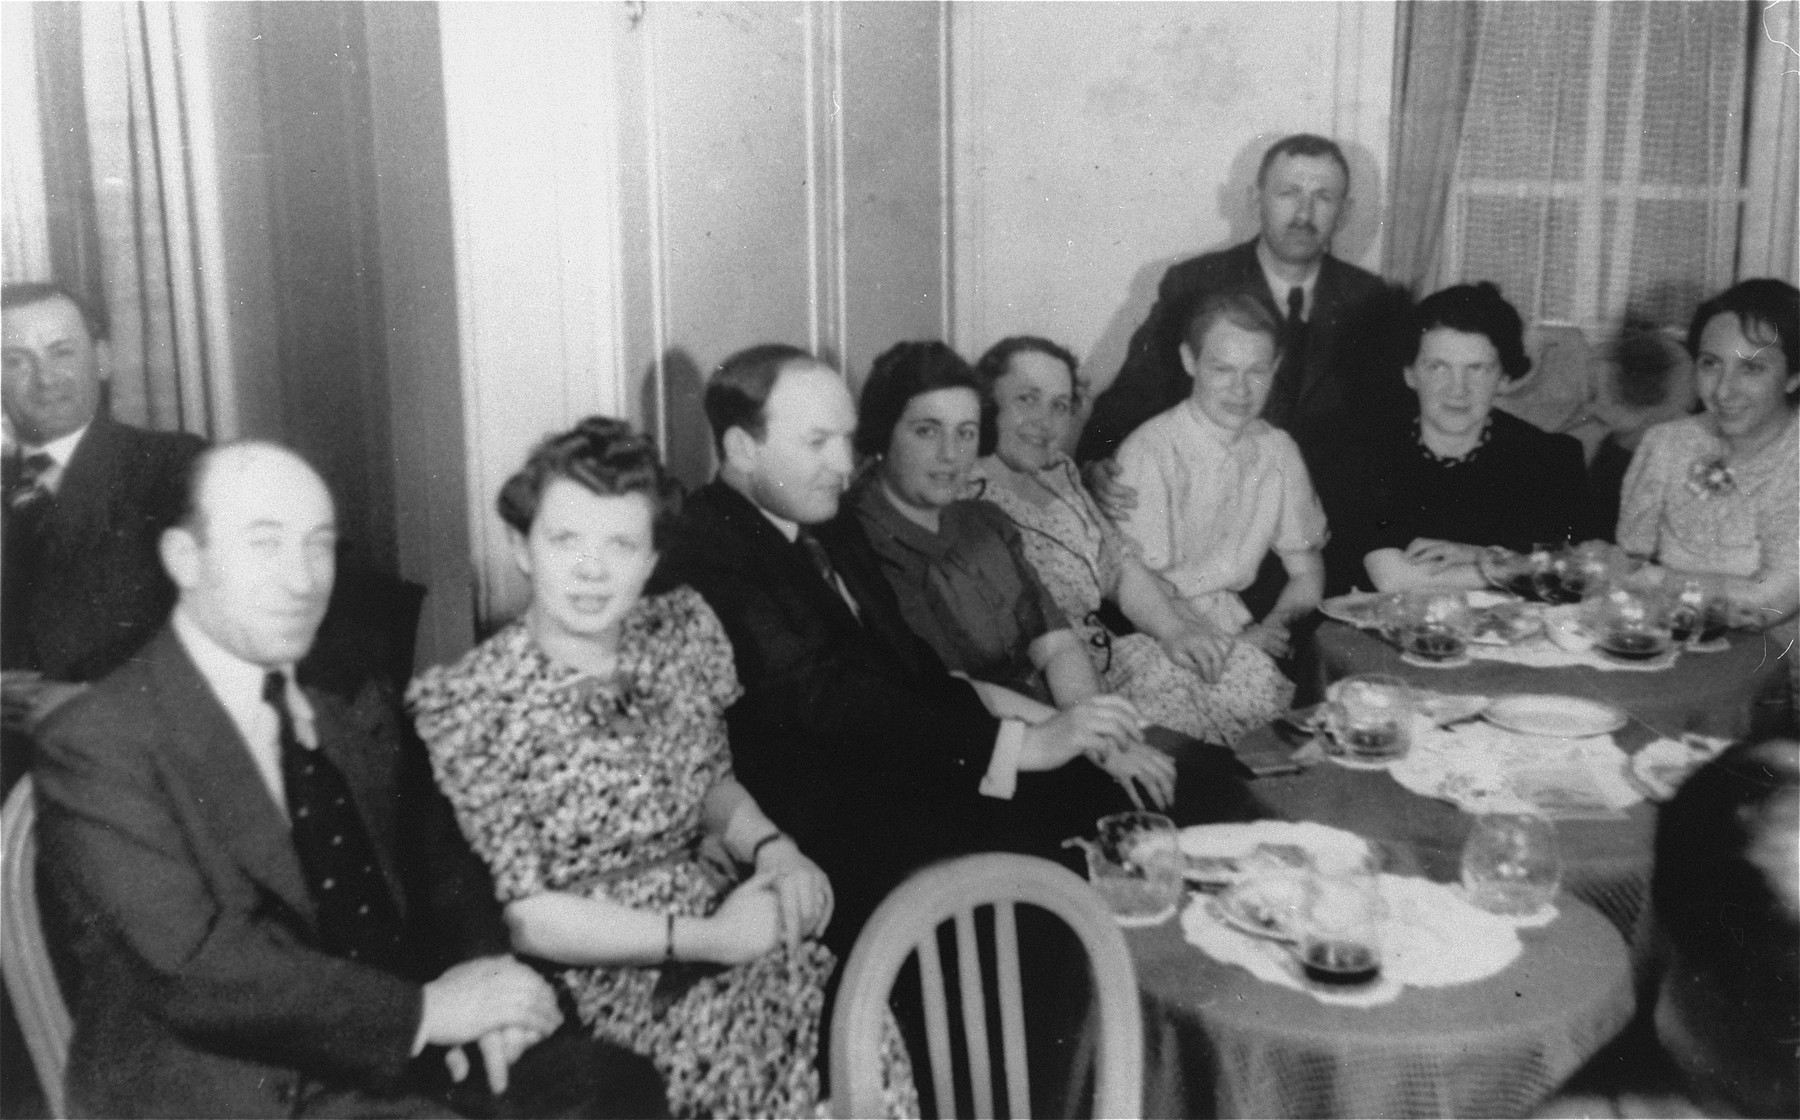 Passengers on board the MS St. Louis sit around tables in the dining area.  

Among those pictured are Joseph Karliner, Martha Karliner, Walter Weissler, Vera Spitz, Erna Ring, Gertrude Eskenazi and Grete Guttmann.